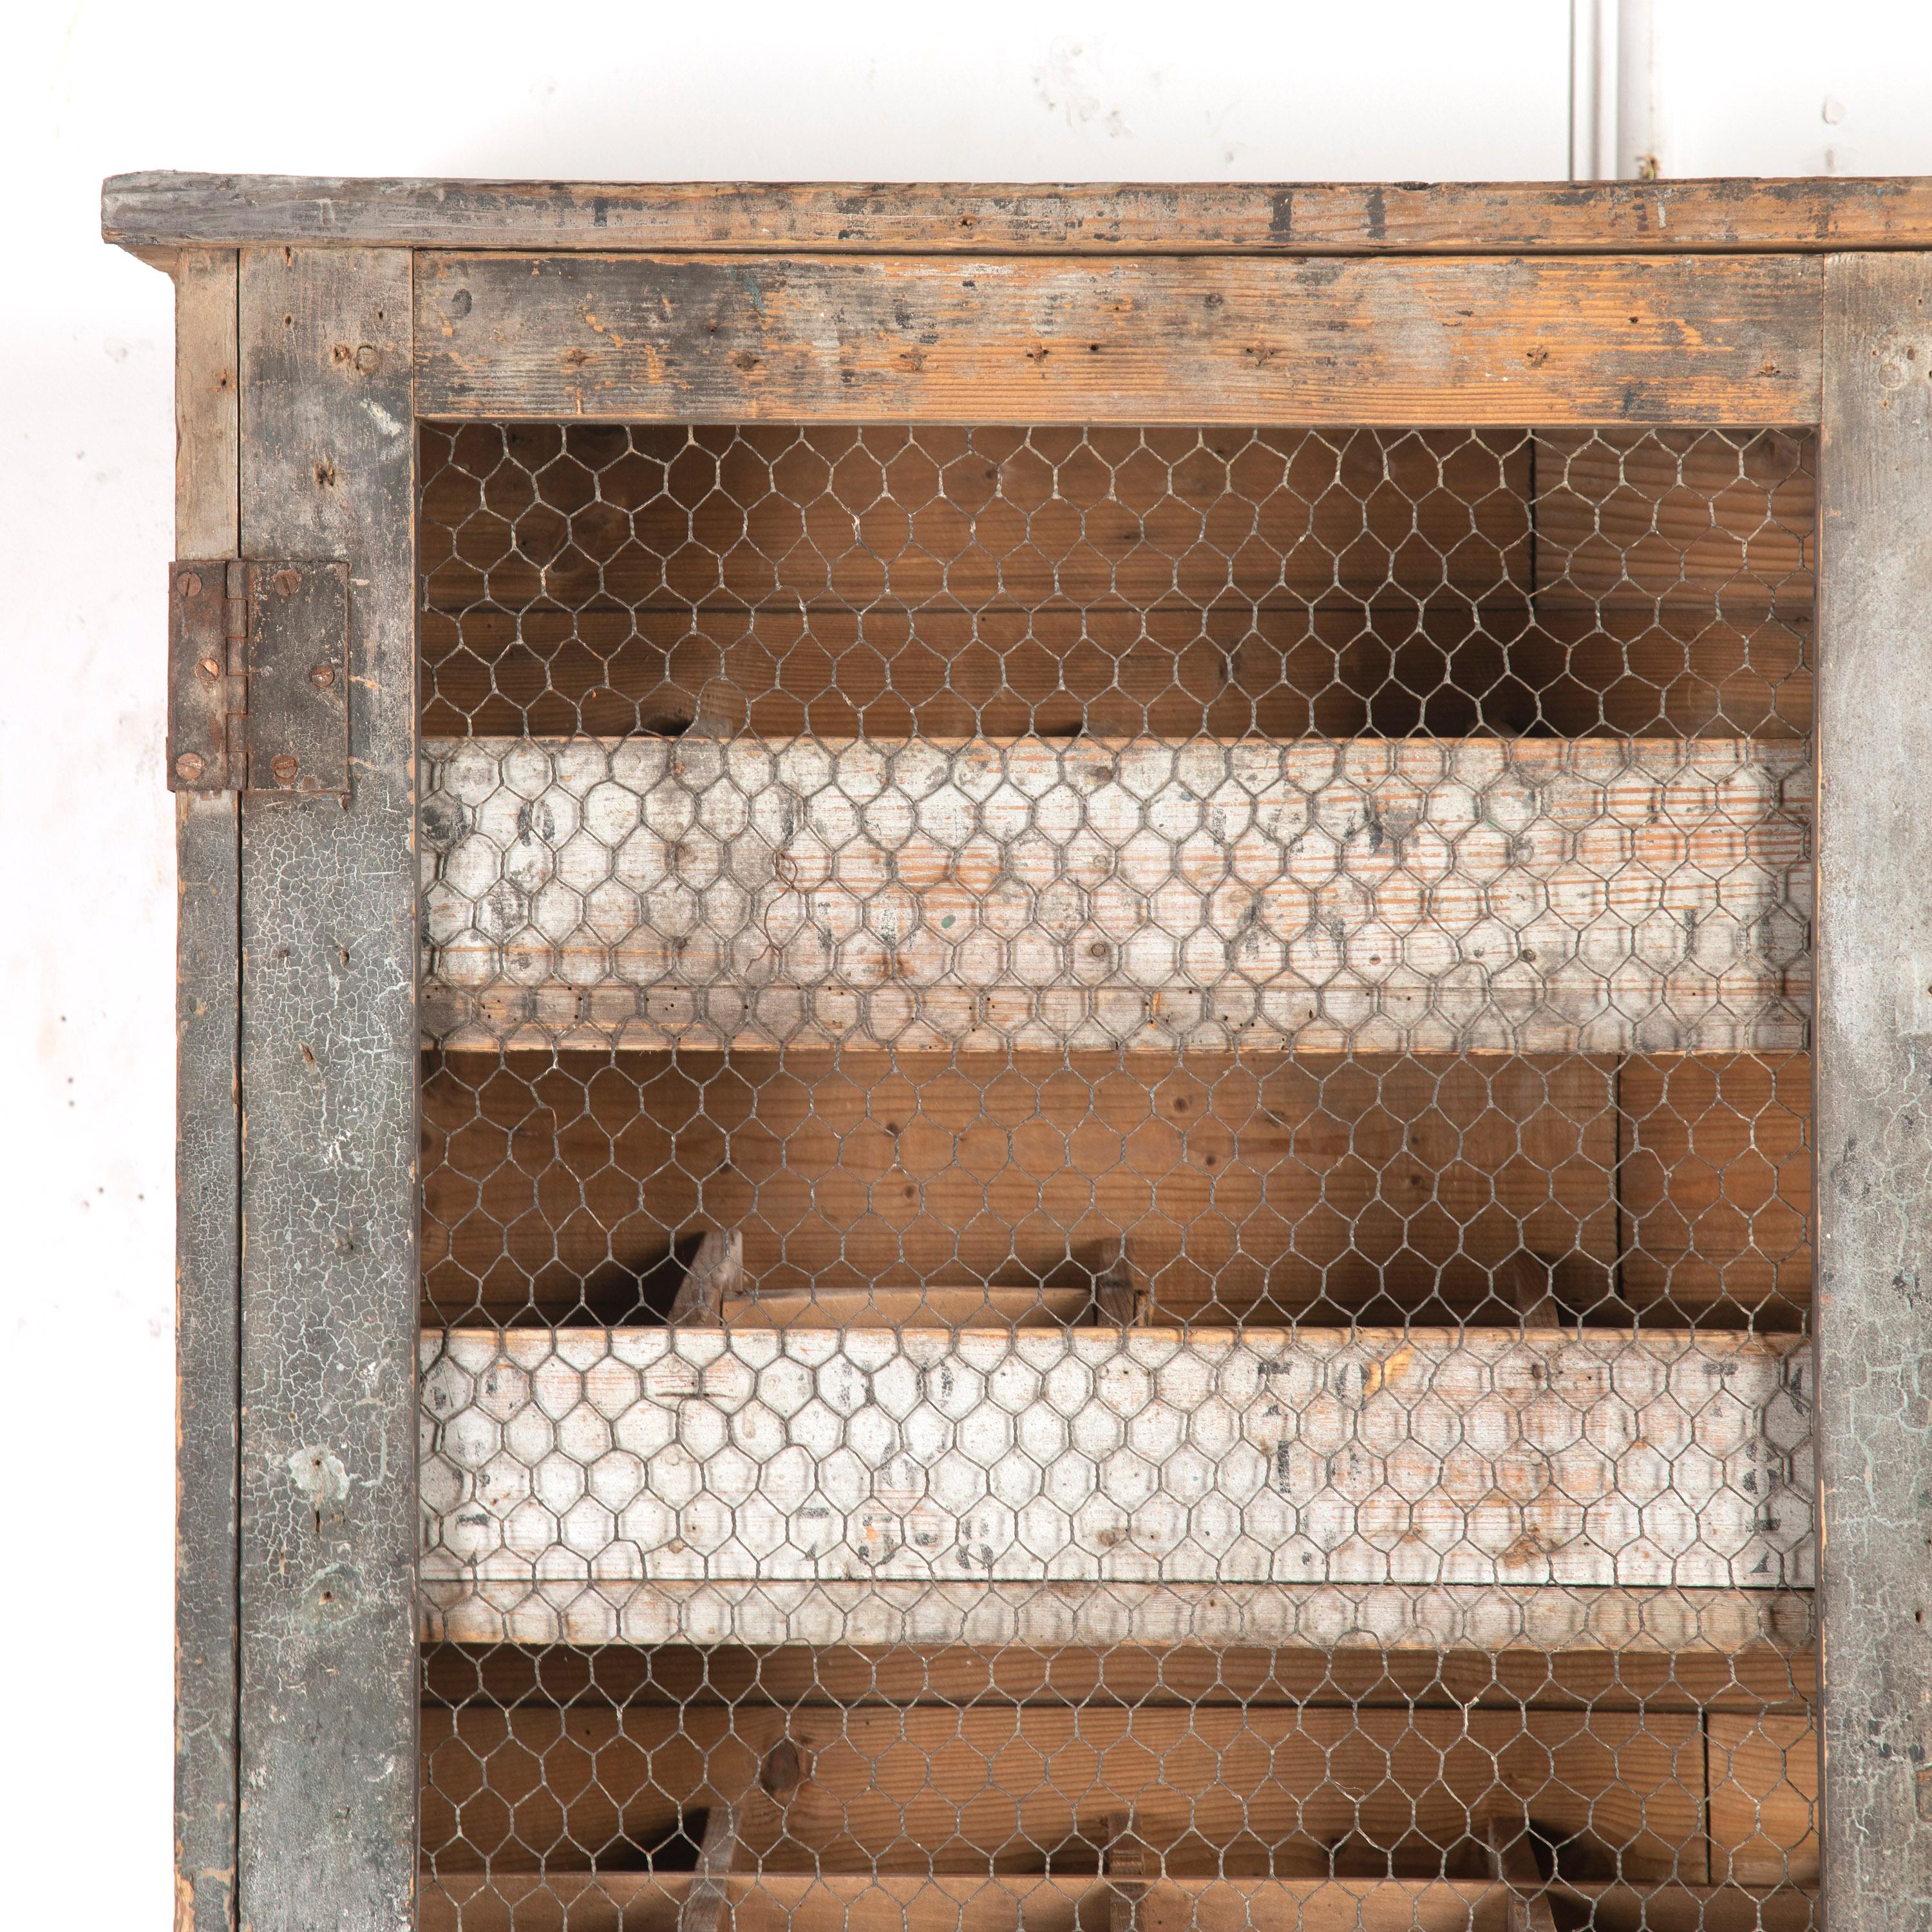 Wonderful French 20th century atelier's storage unit.

This unit has a great industrial aesthetic and originally came from a Parisian workshop.

It has a simple wooden framework and wire netting over the doors. Retaining charming splashes of old